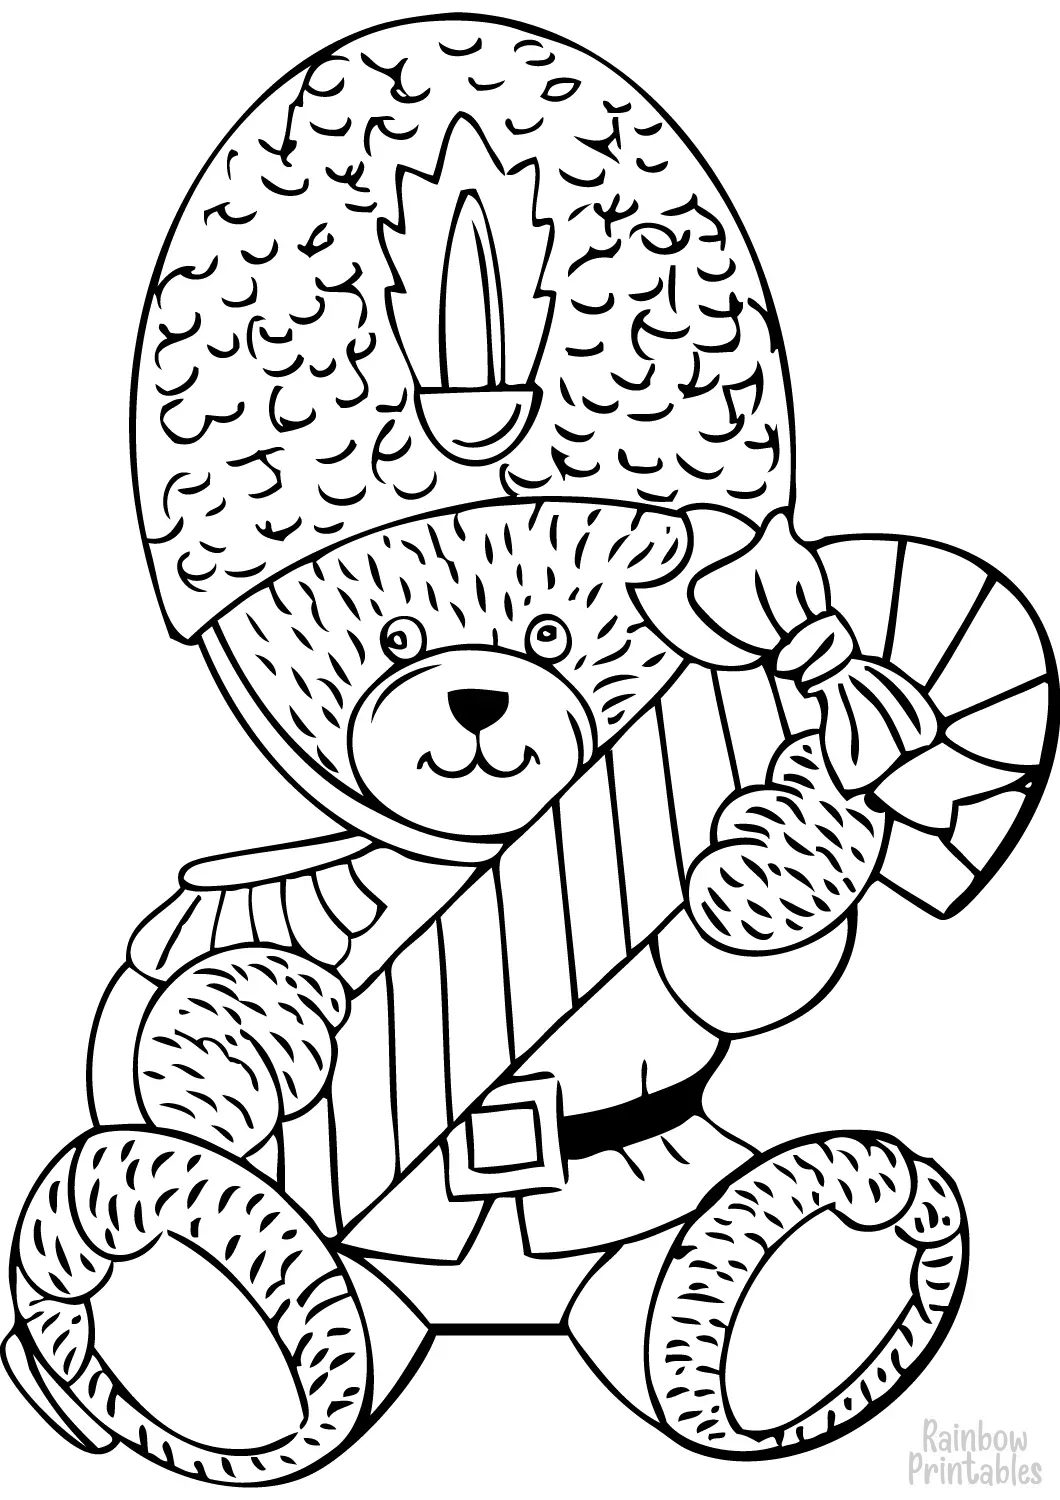 teddy-bear-with-candy-cane-Coloring Page Christmas Xmas Coloring Activities for Kids